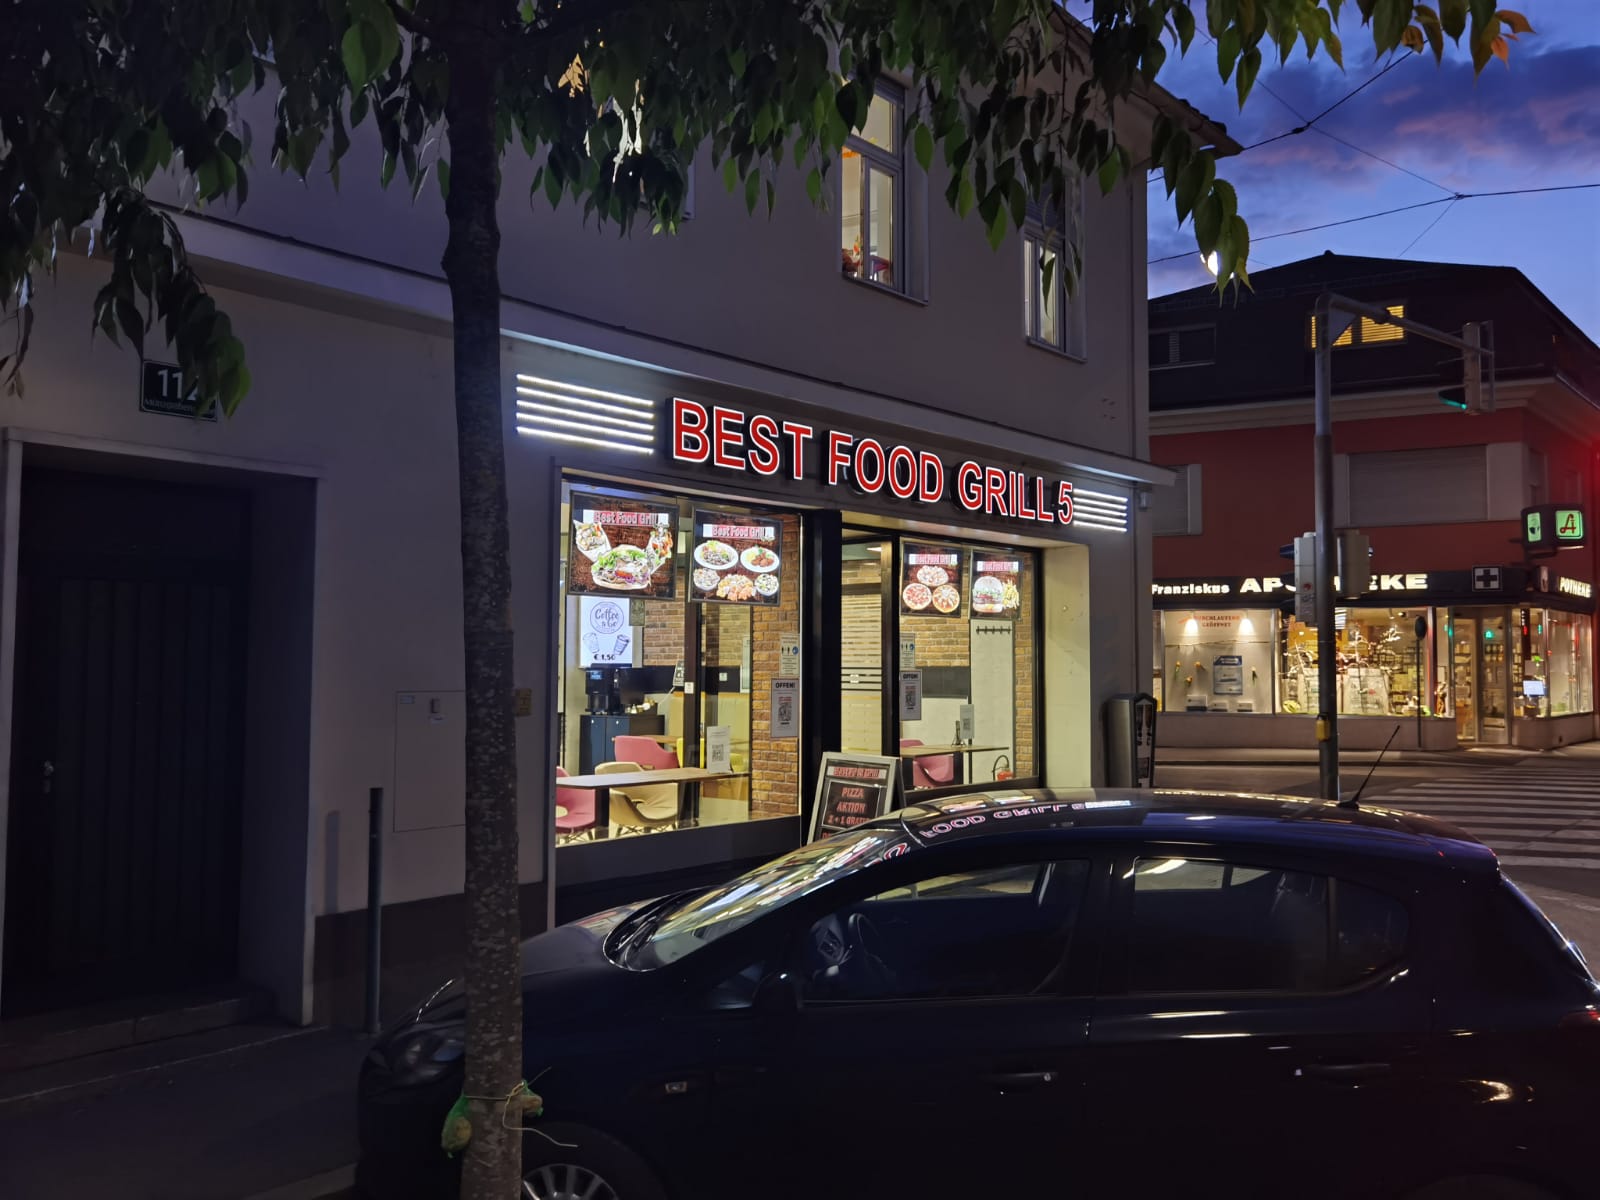 Best Food Grill 5